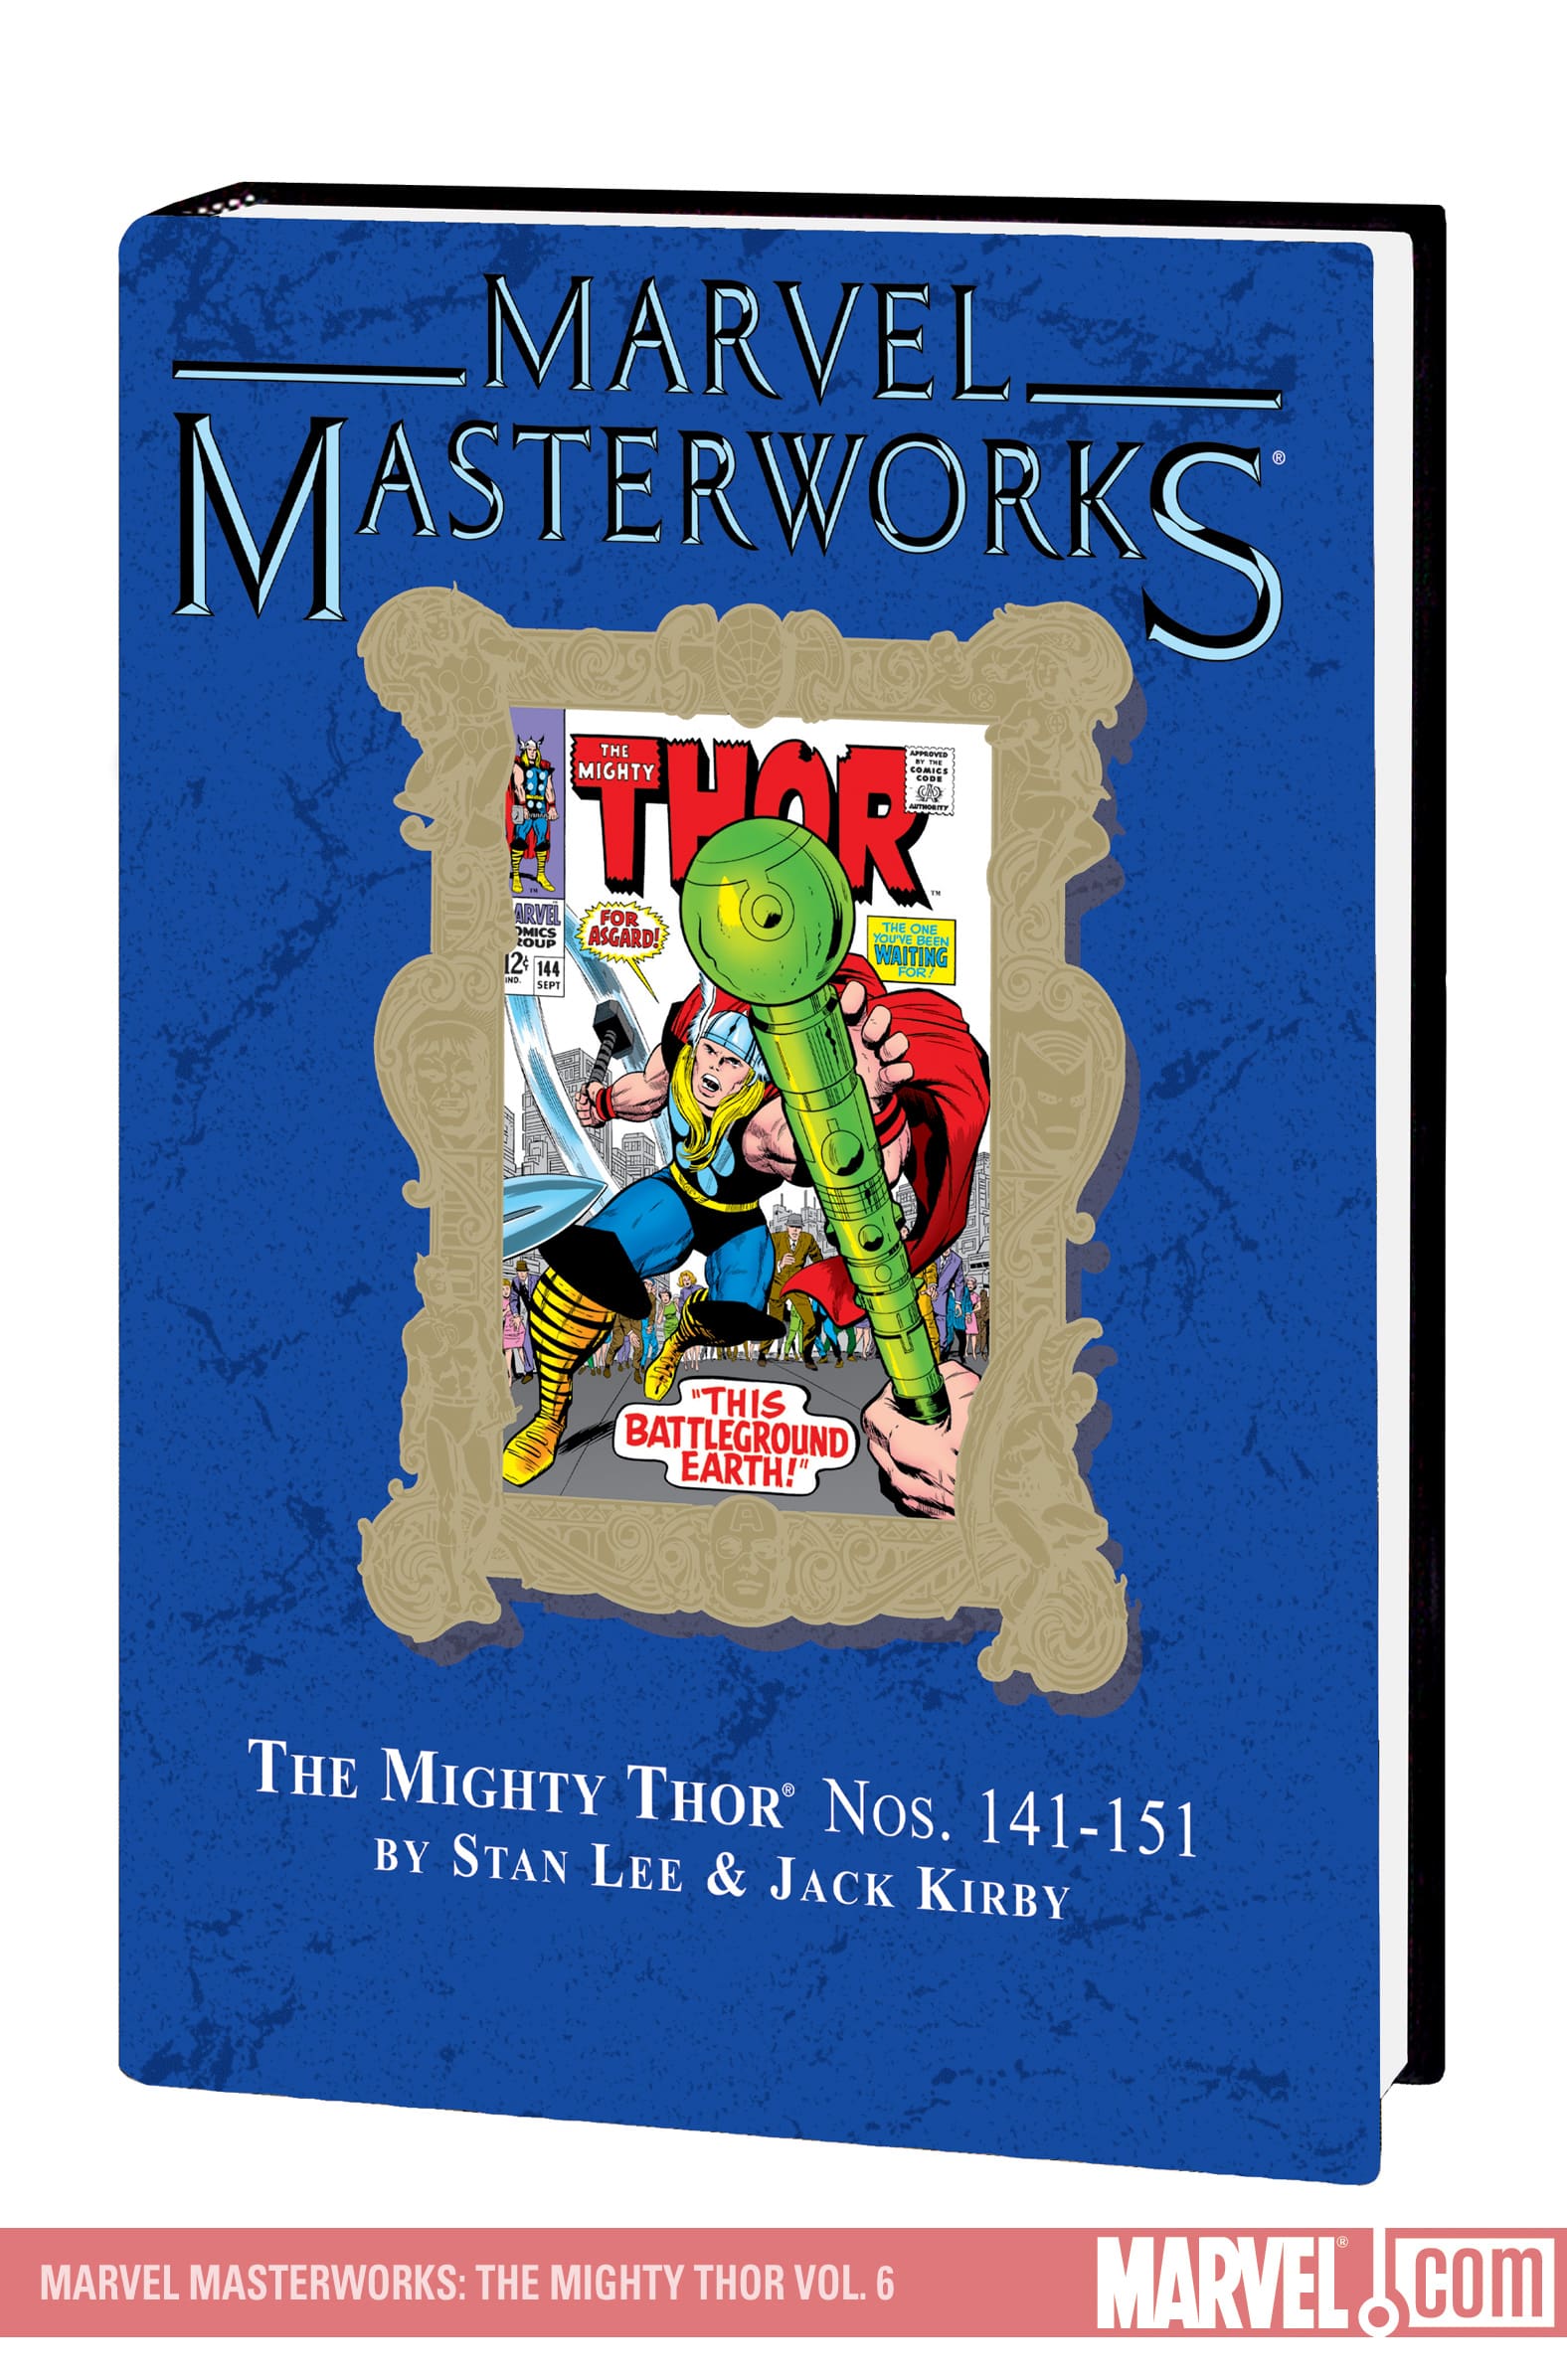 Marvel Masterworks: The Mighty Thor Vol. 6 (Trade Paperback)